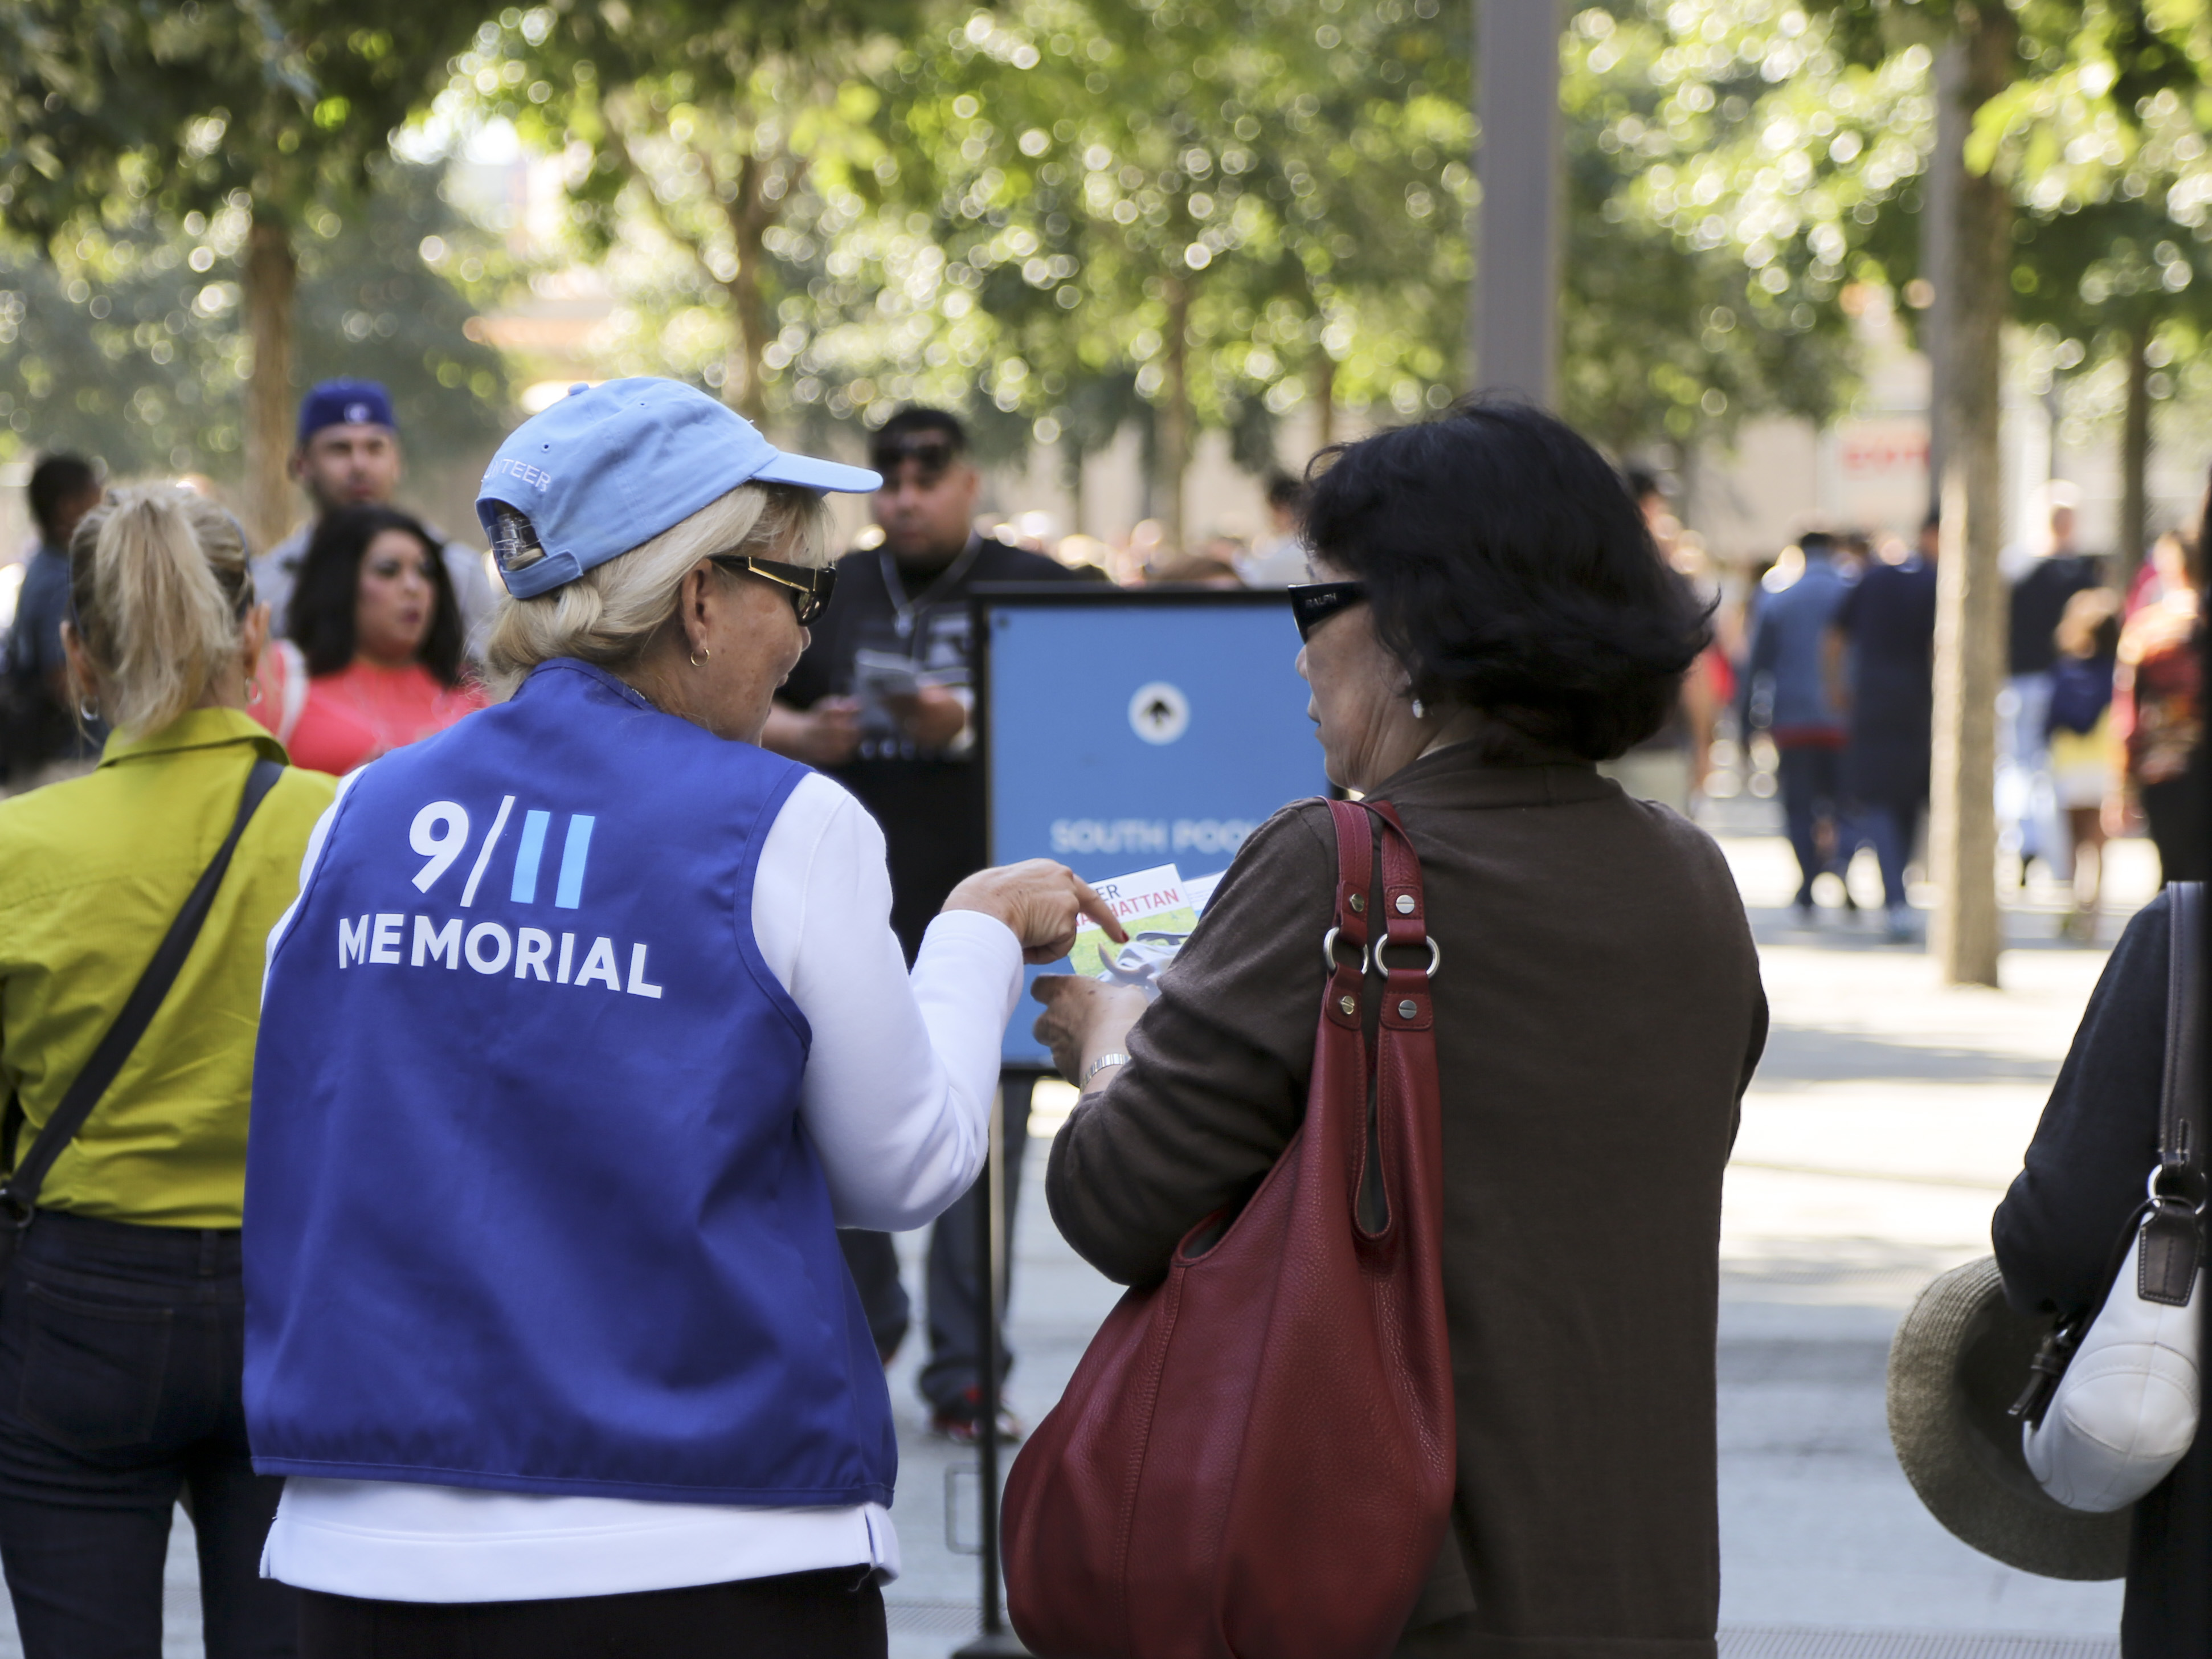 A volunteer in a blue vest that reads 9/11 Memorial assists a woman on the Memorial plaza.